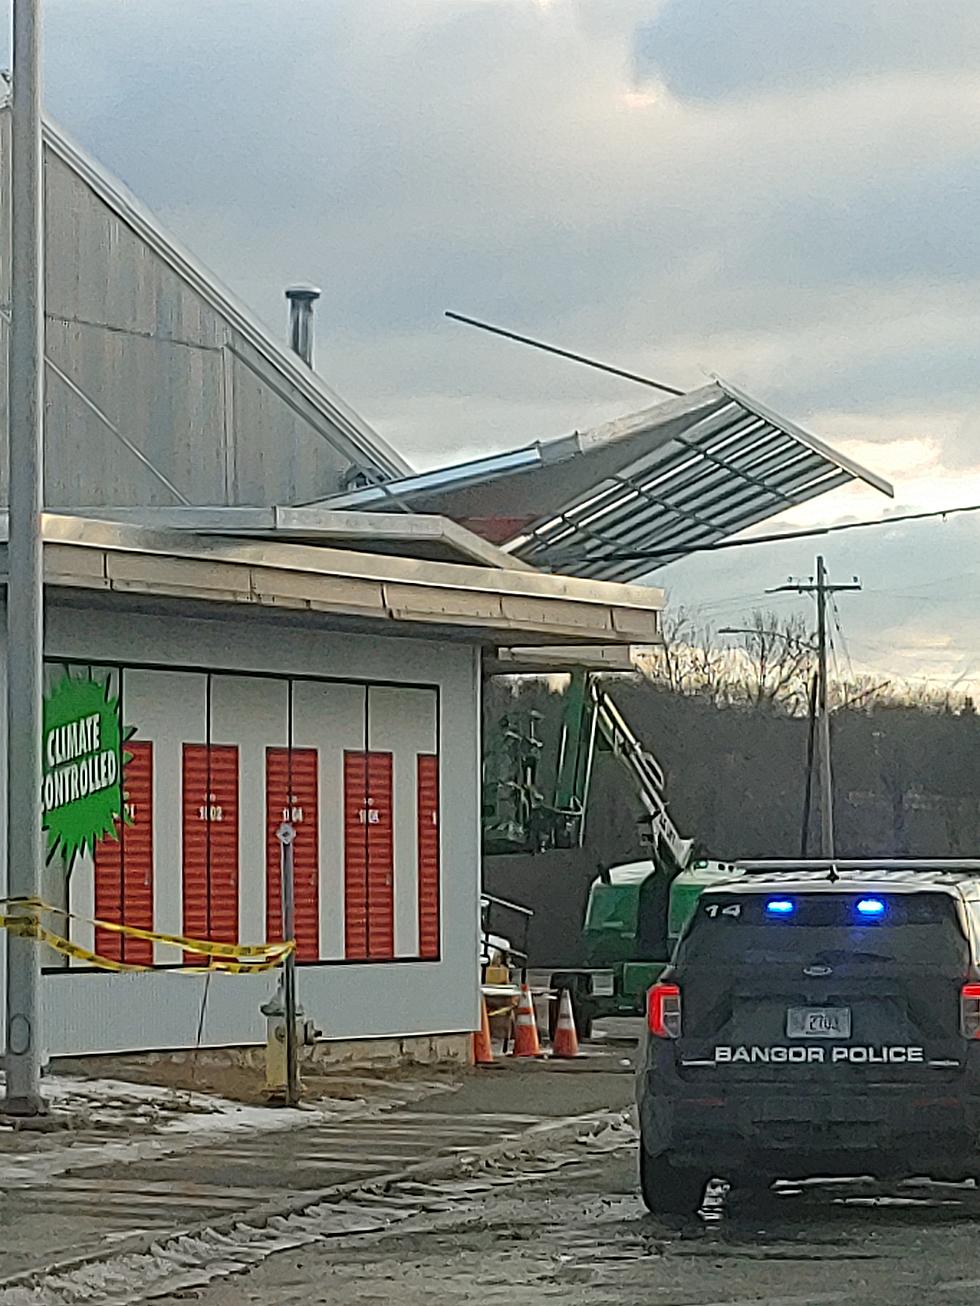 High Winds Cause Part Of Bangor Business To Topple Over